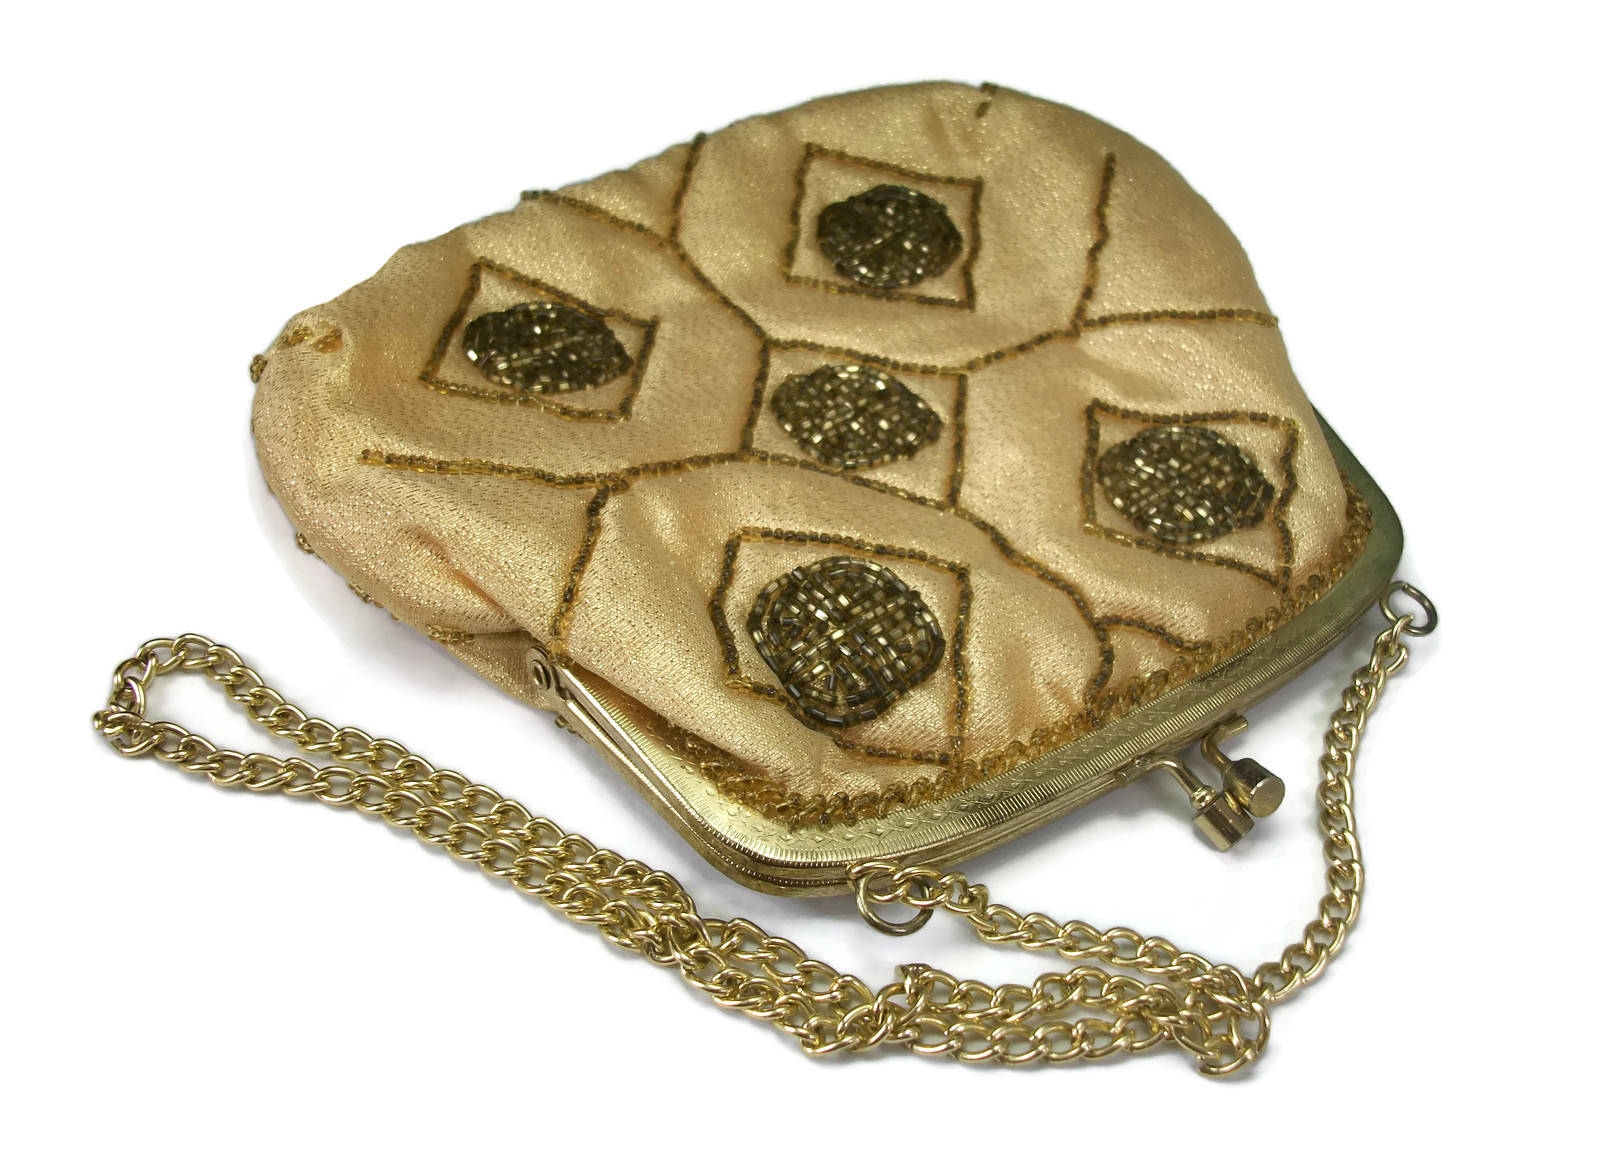 Beaded Purse with Chain Link Strap